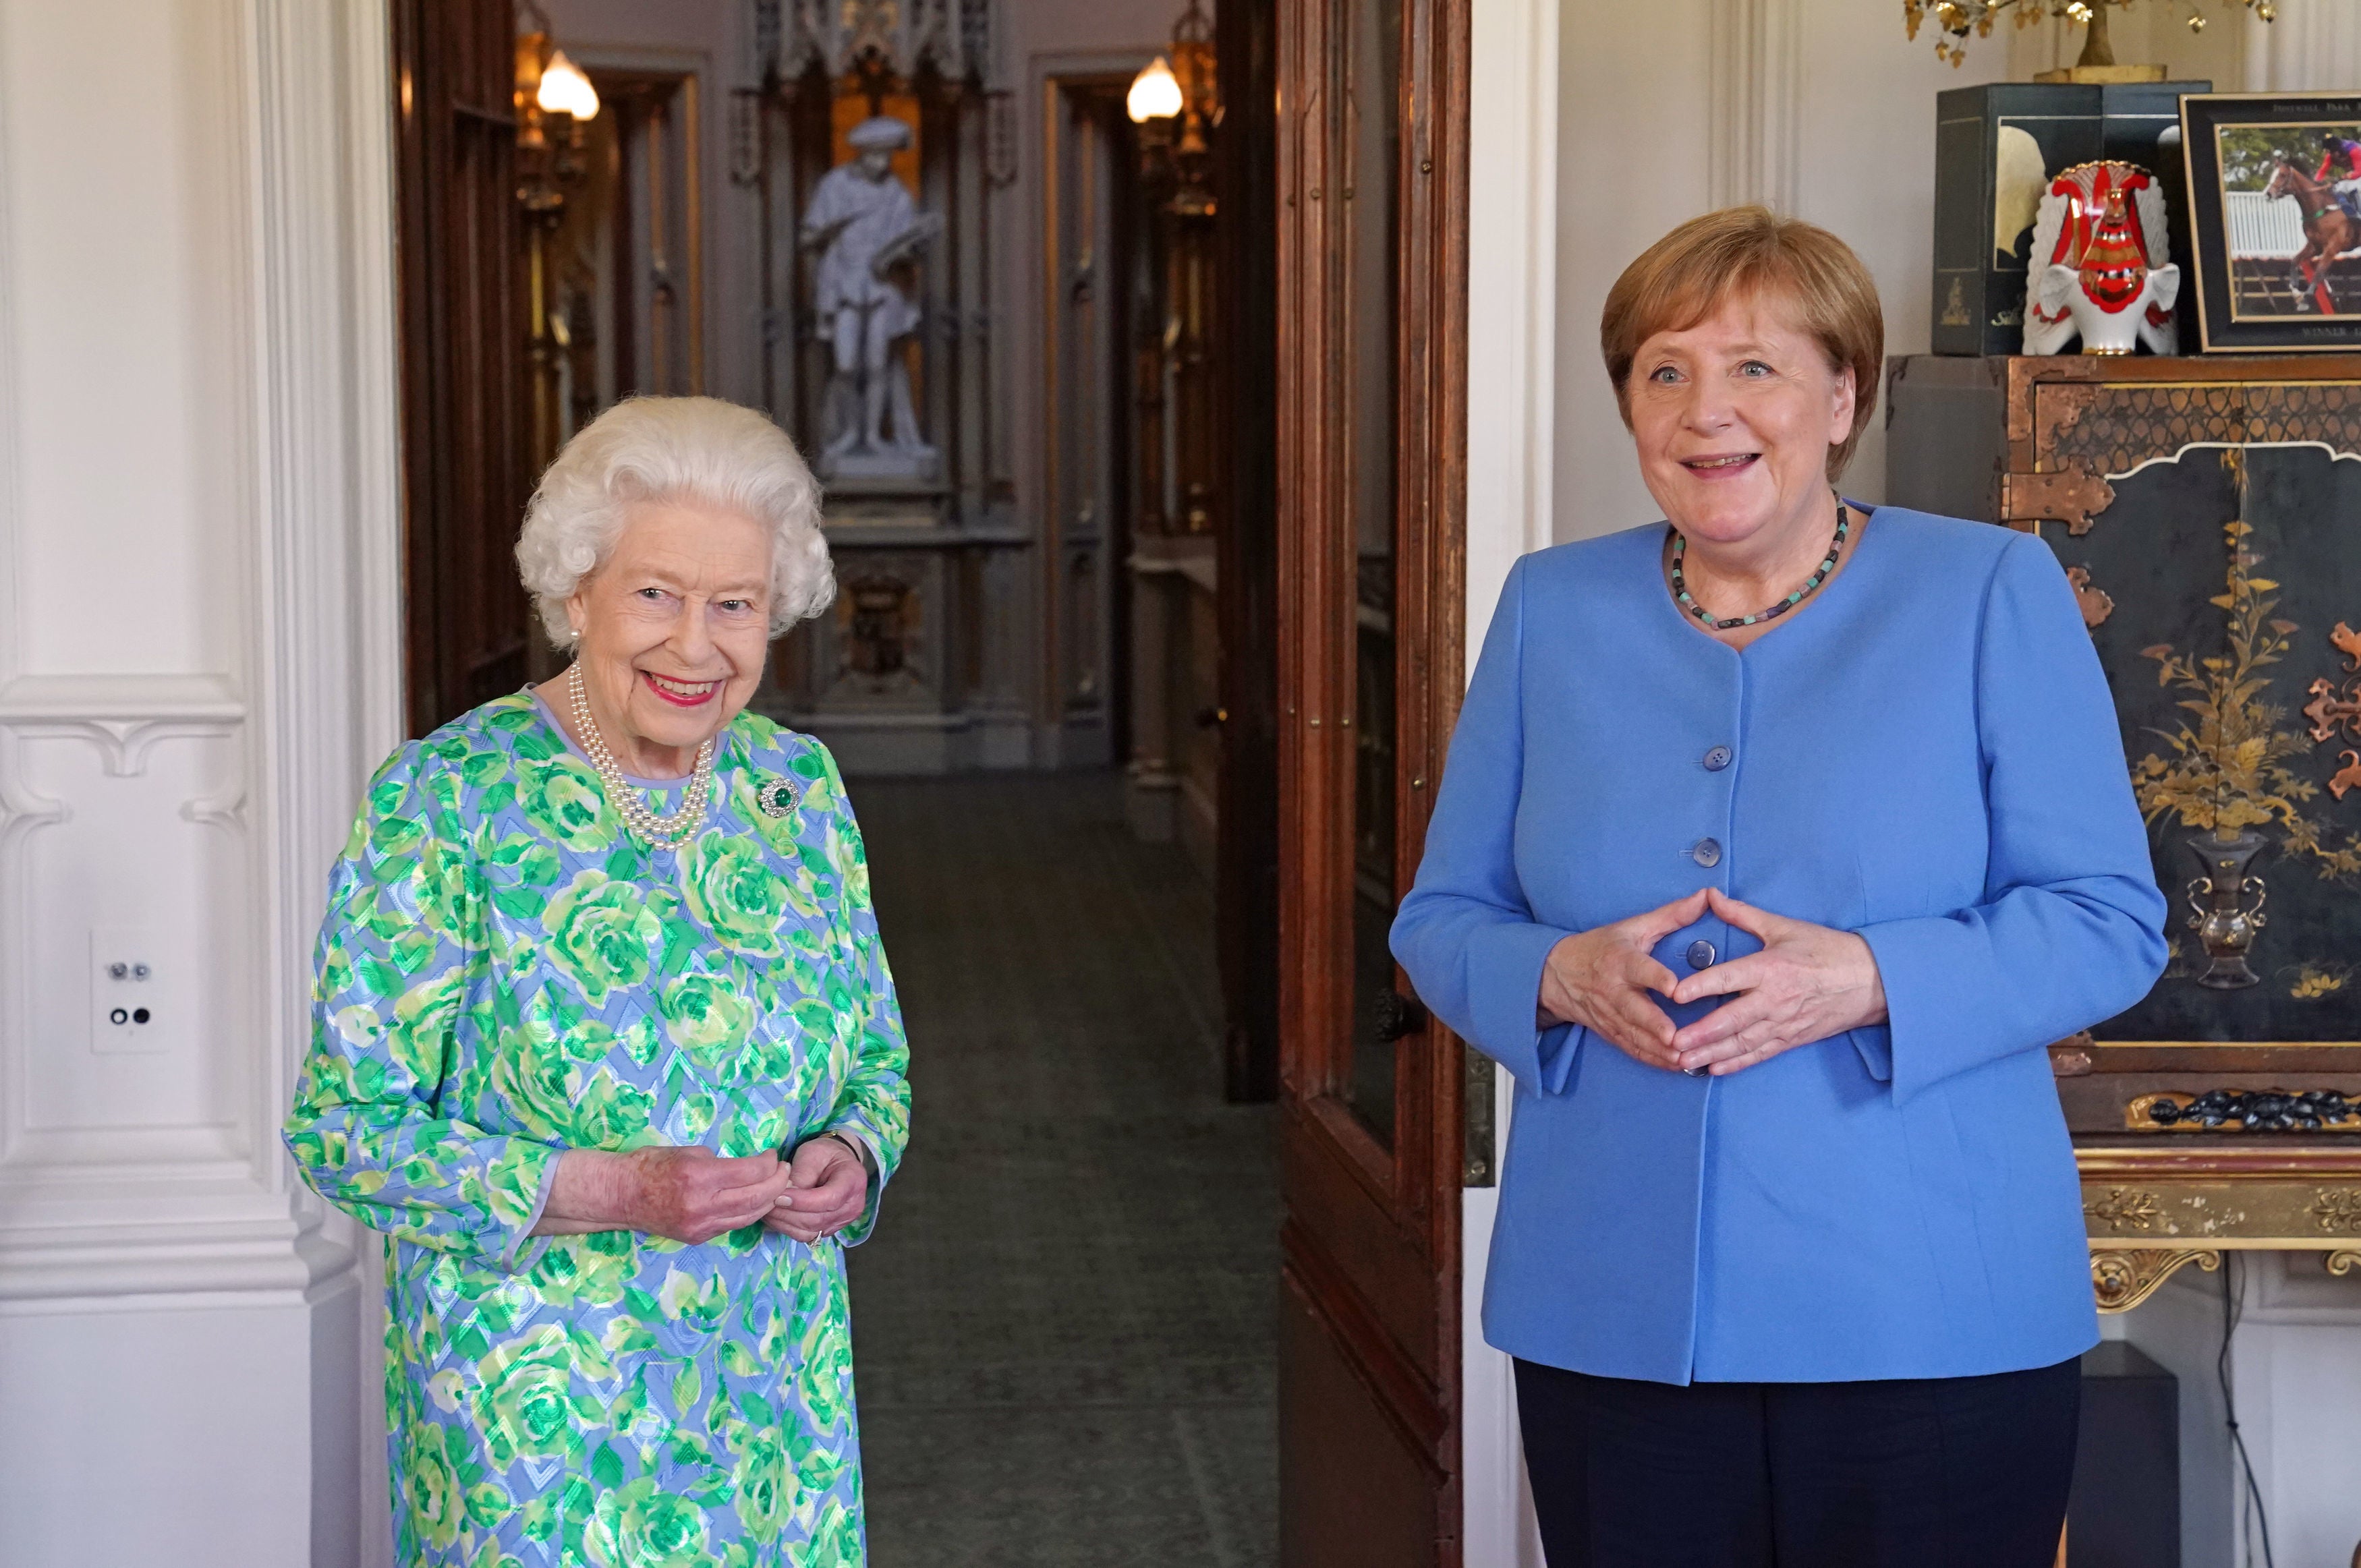 The Queen hosted Angela Merkel as the German chancellor prepared to step down (Steve Parsons/PA)